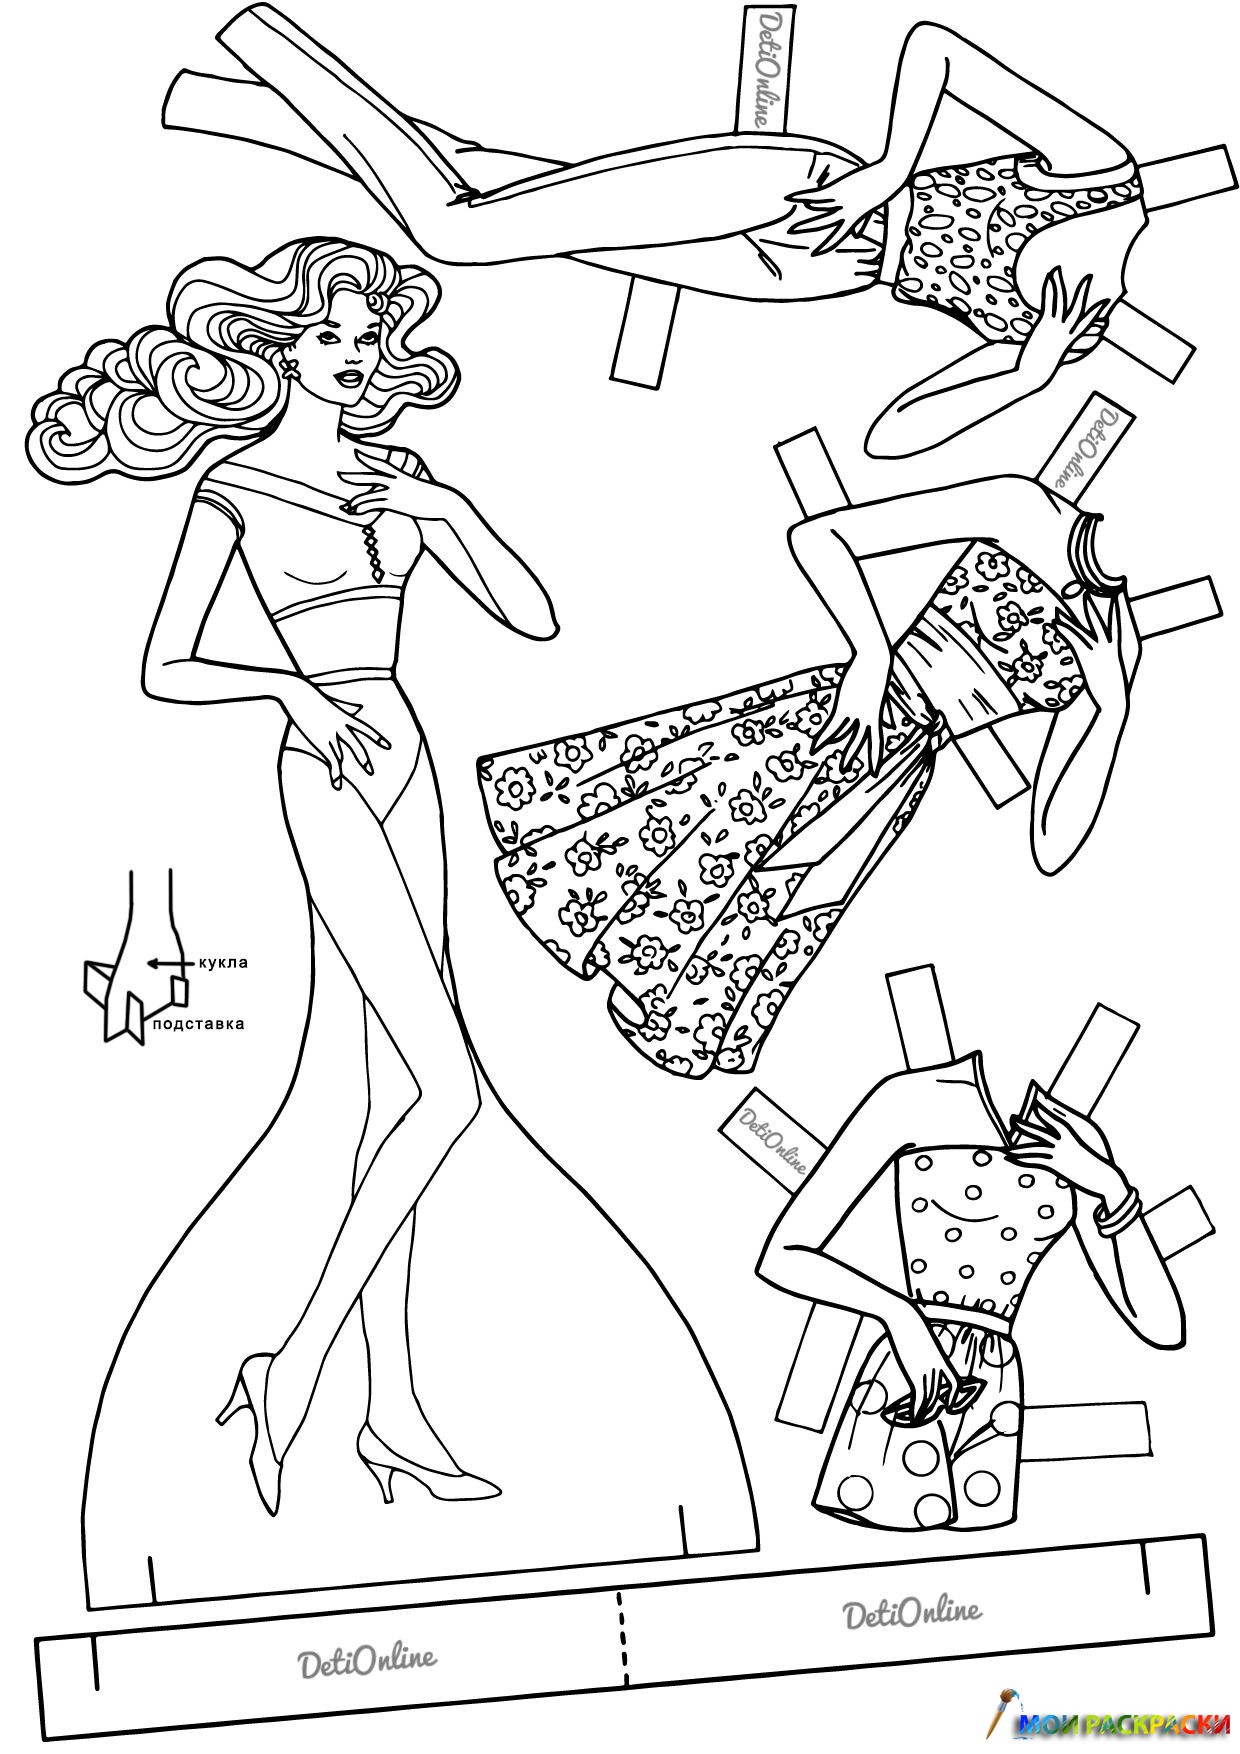 Barbie paper doll with cut out clothes #7